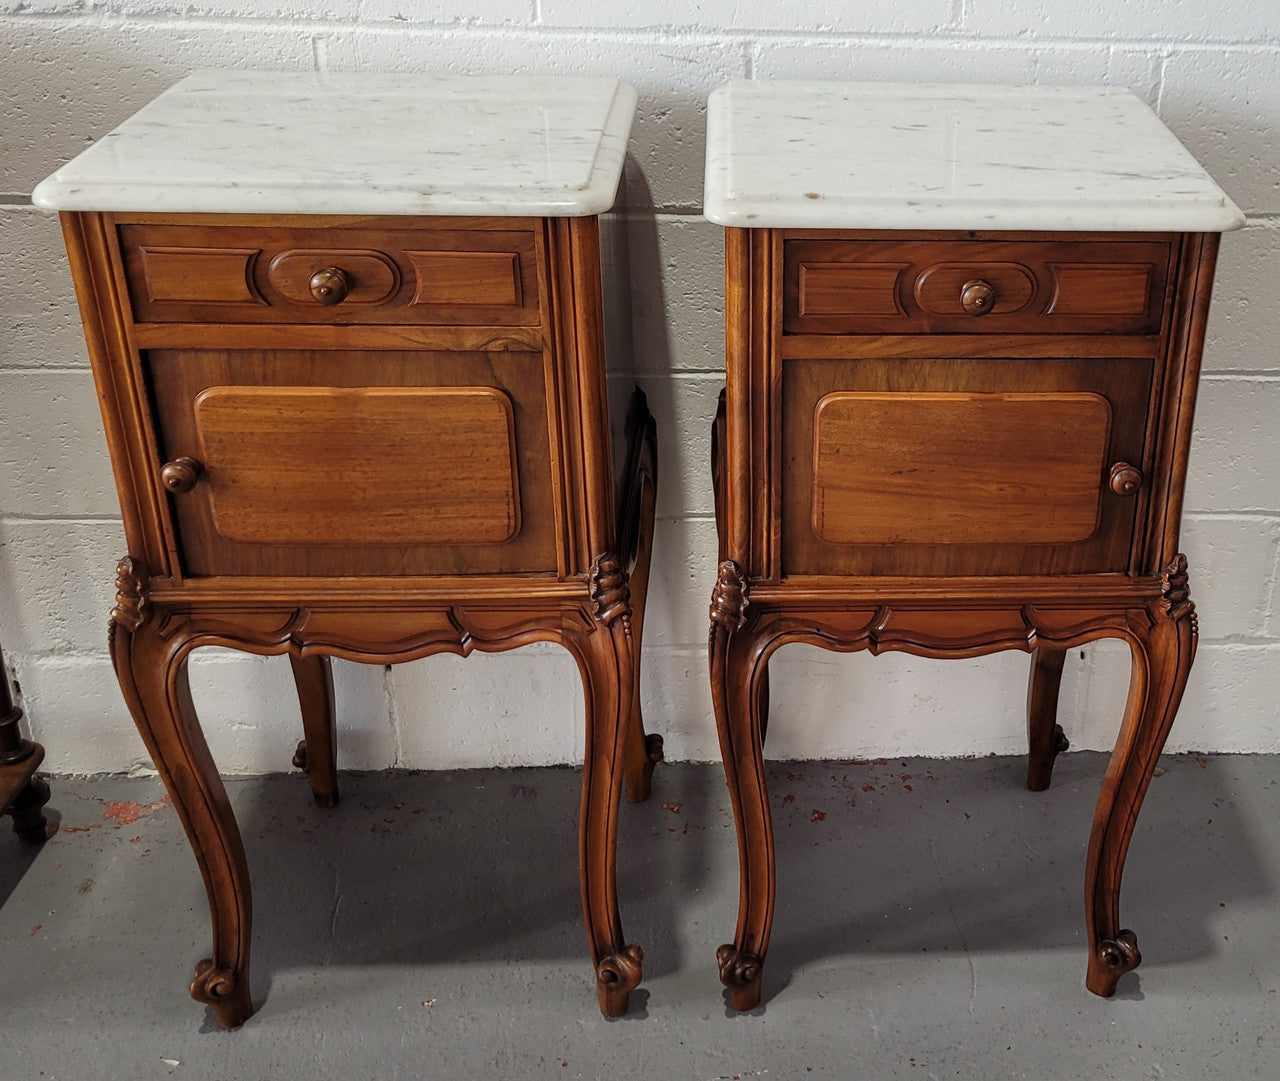 Pair of stunning Louis XV style French Walnut white marble top bedside cabinets. They have one drawer and a cupboard that is marble lined. The marble has been polished and they are in good original detailed condition.